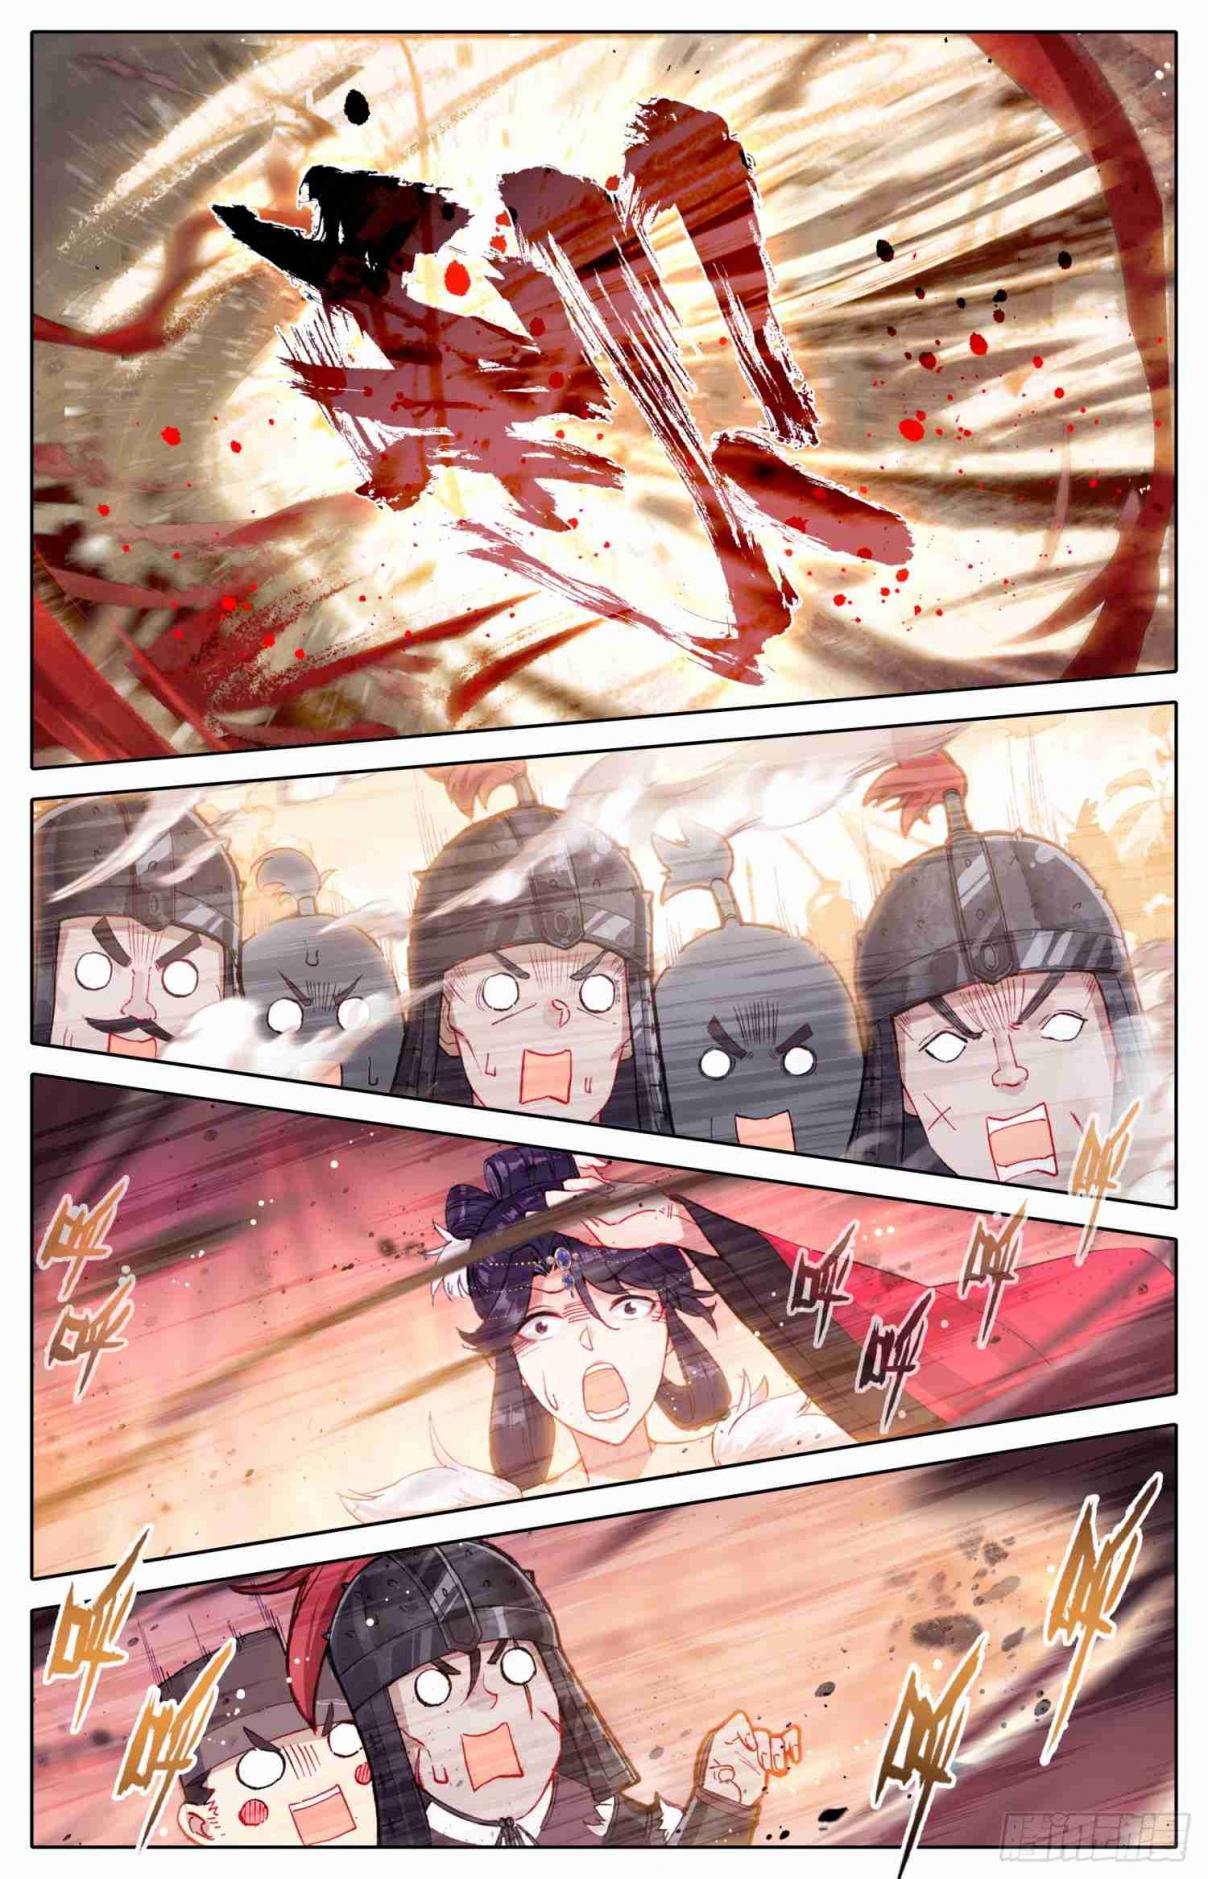 Legend of the Tyrant Empress Ch. 36 All Hail the Emperor!!